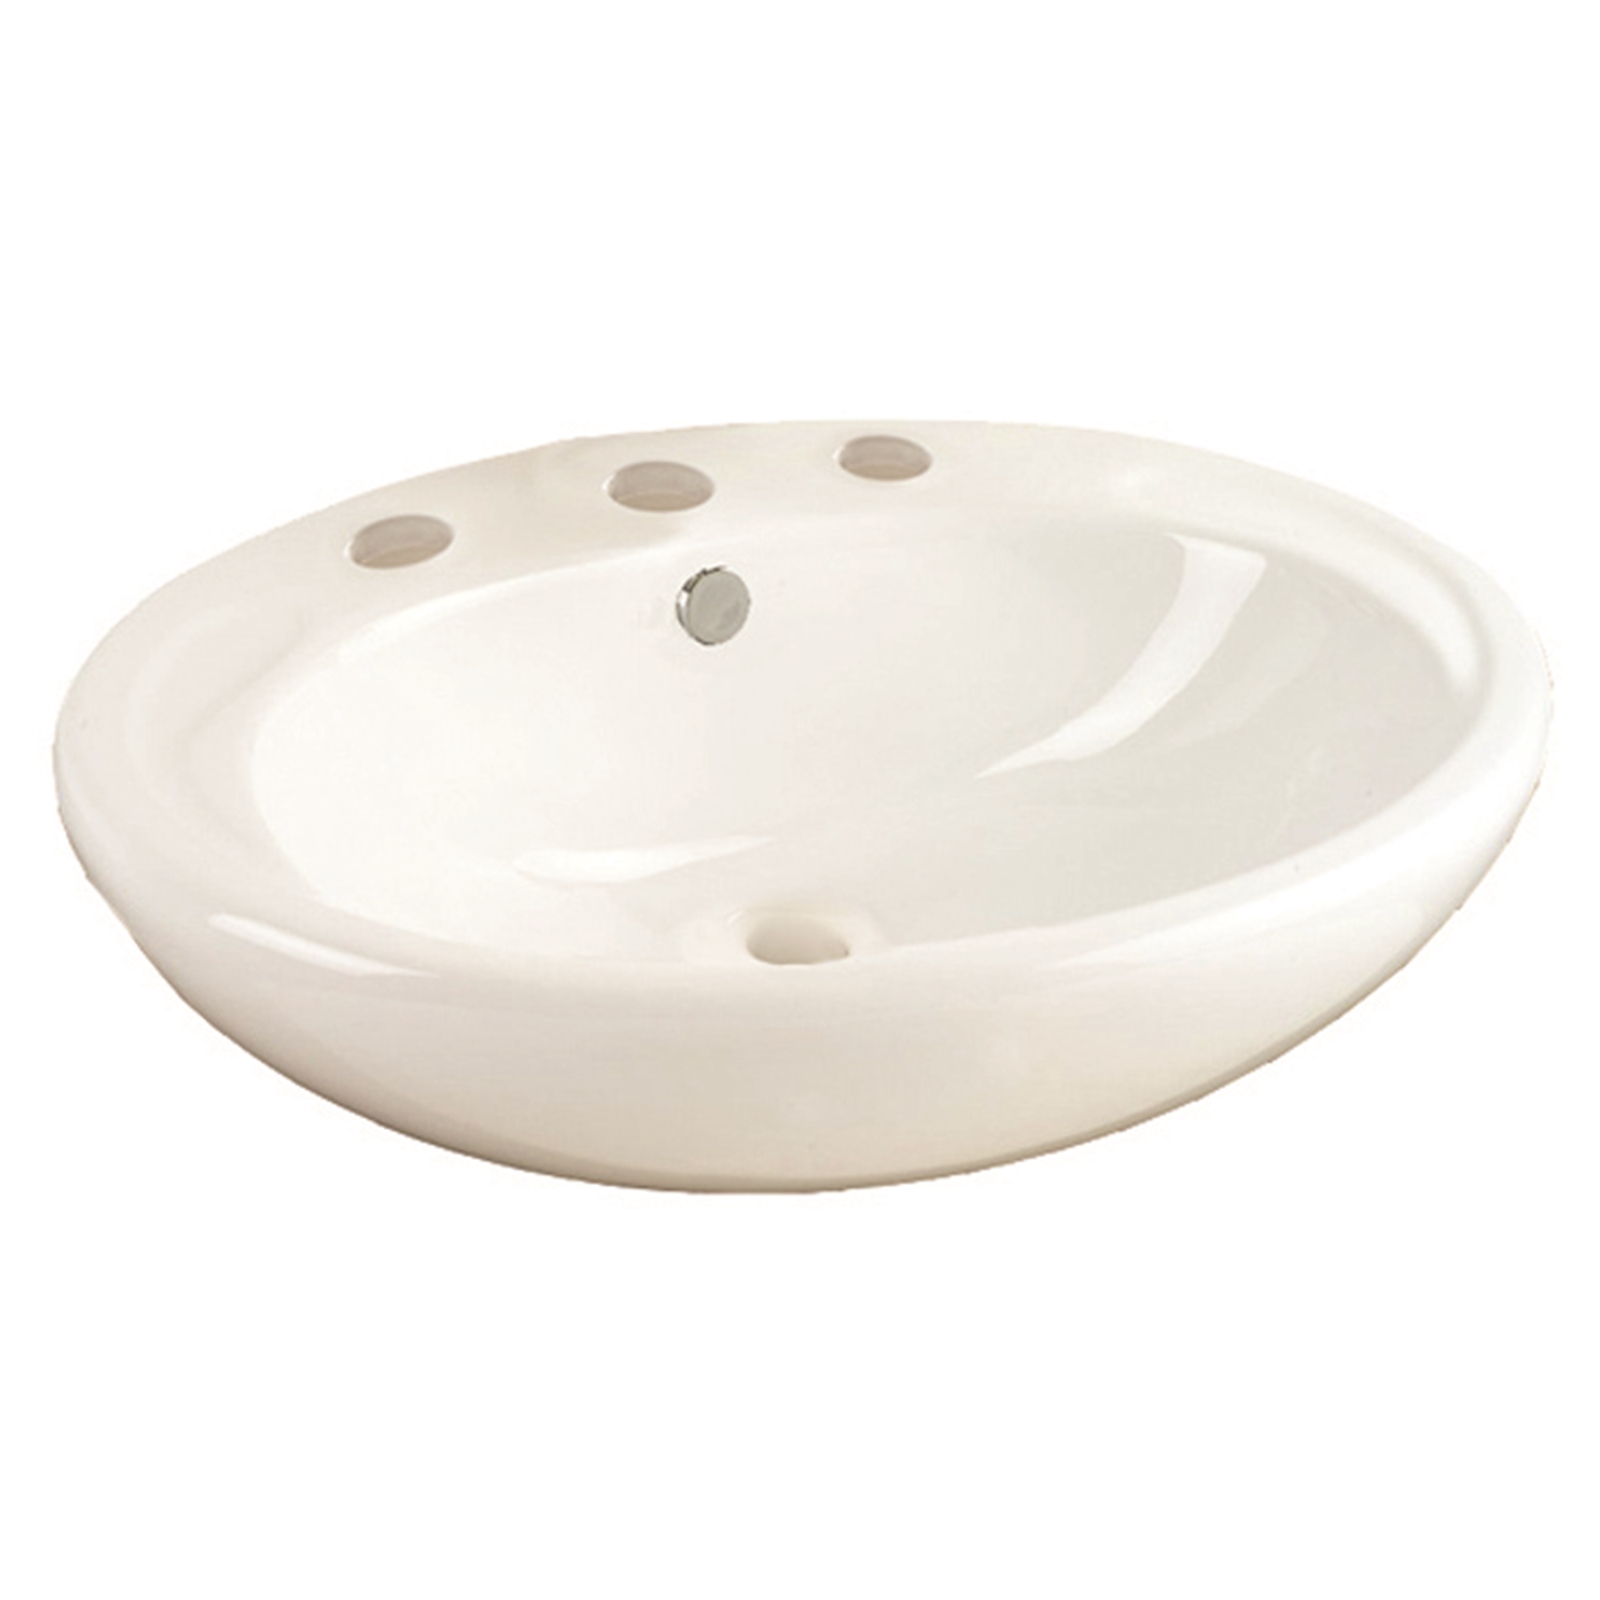 Everhard Virtue Oval Semi-Recessed Vitreous China Drop In Basin